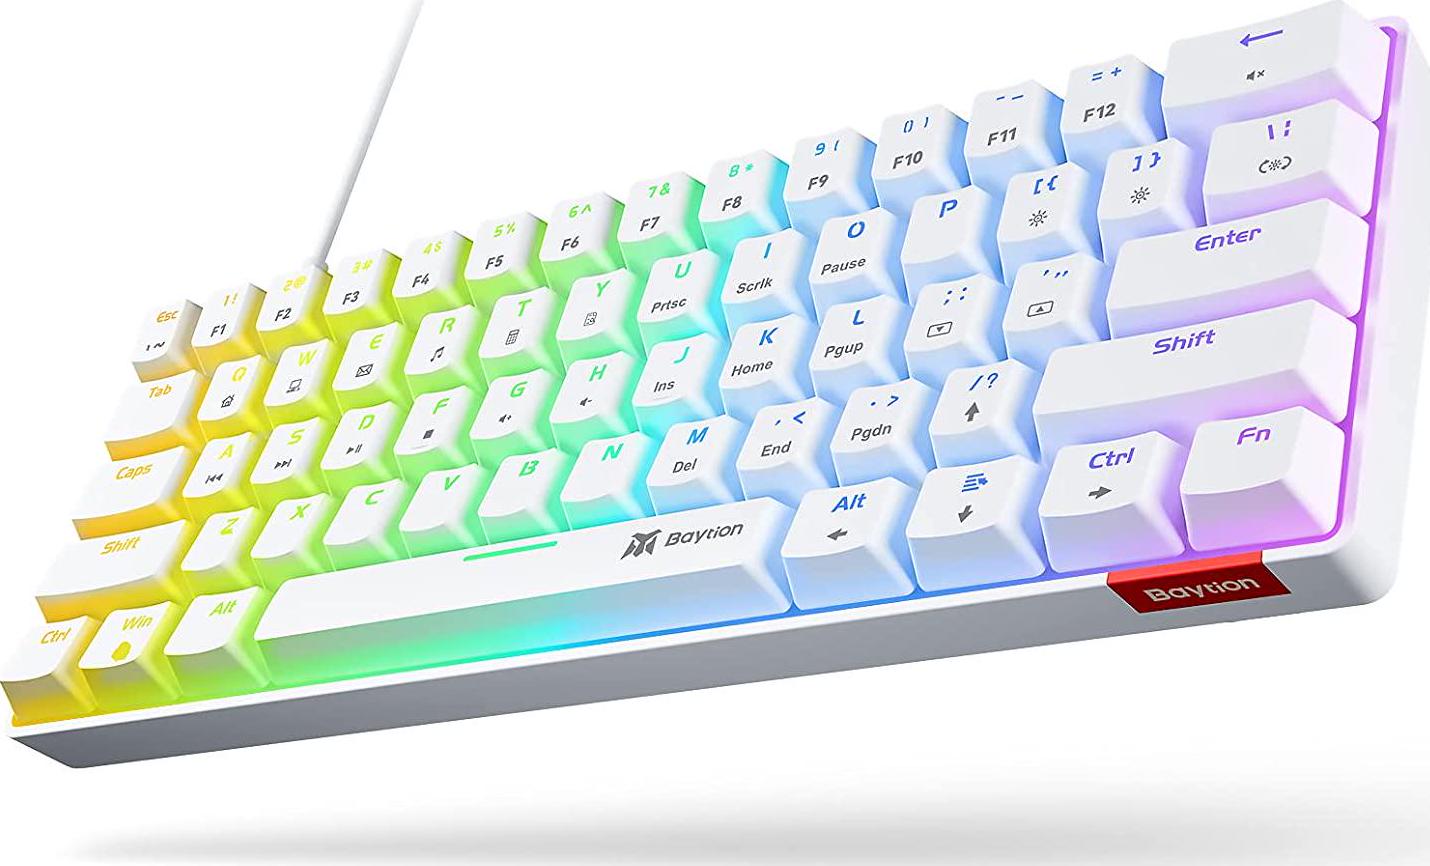 Baytion, Mechanical Gaming Keyboard, Baytion 61 Keys Ultral Compact Wired Keyboard with Blue Switches and RGB Backlit for iOS, Android and Windows, White